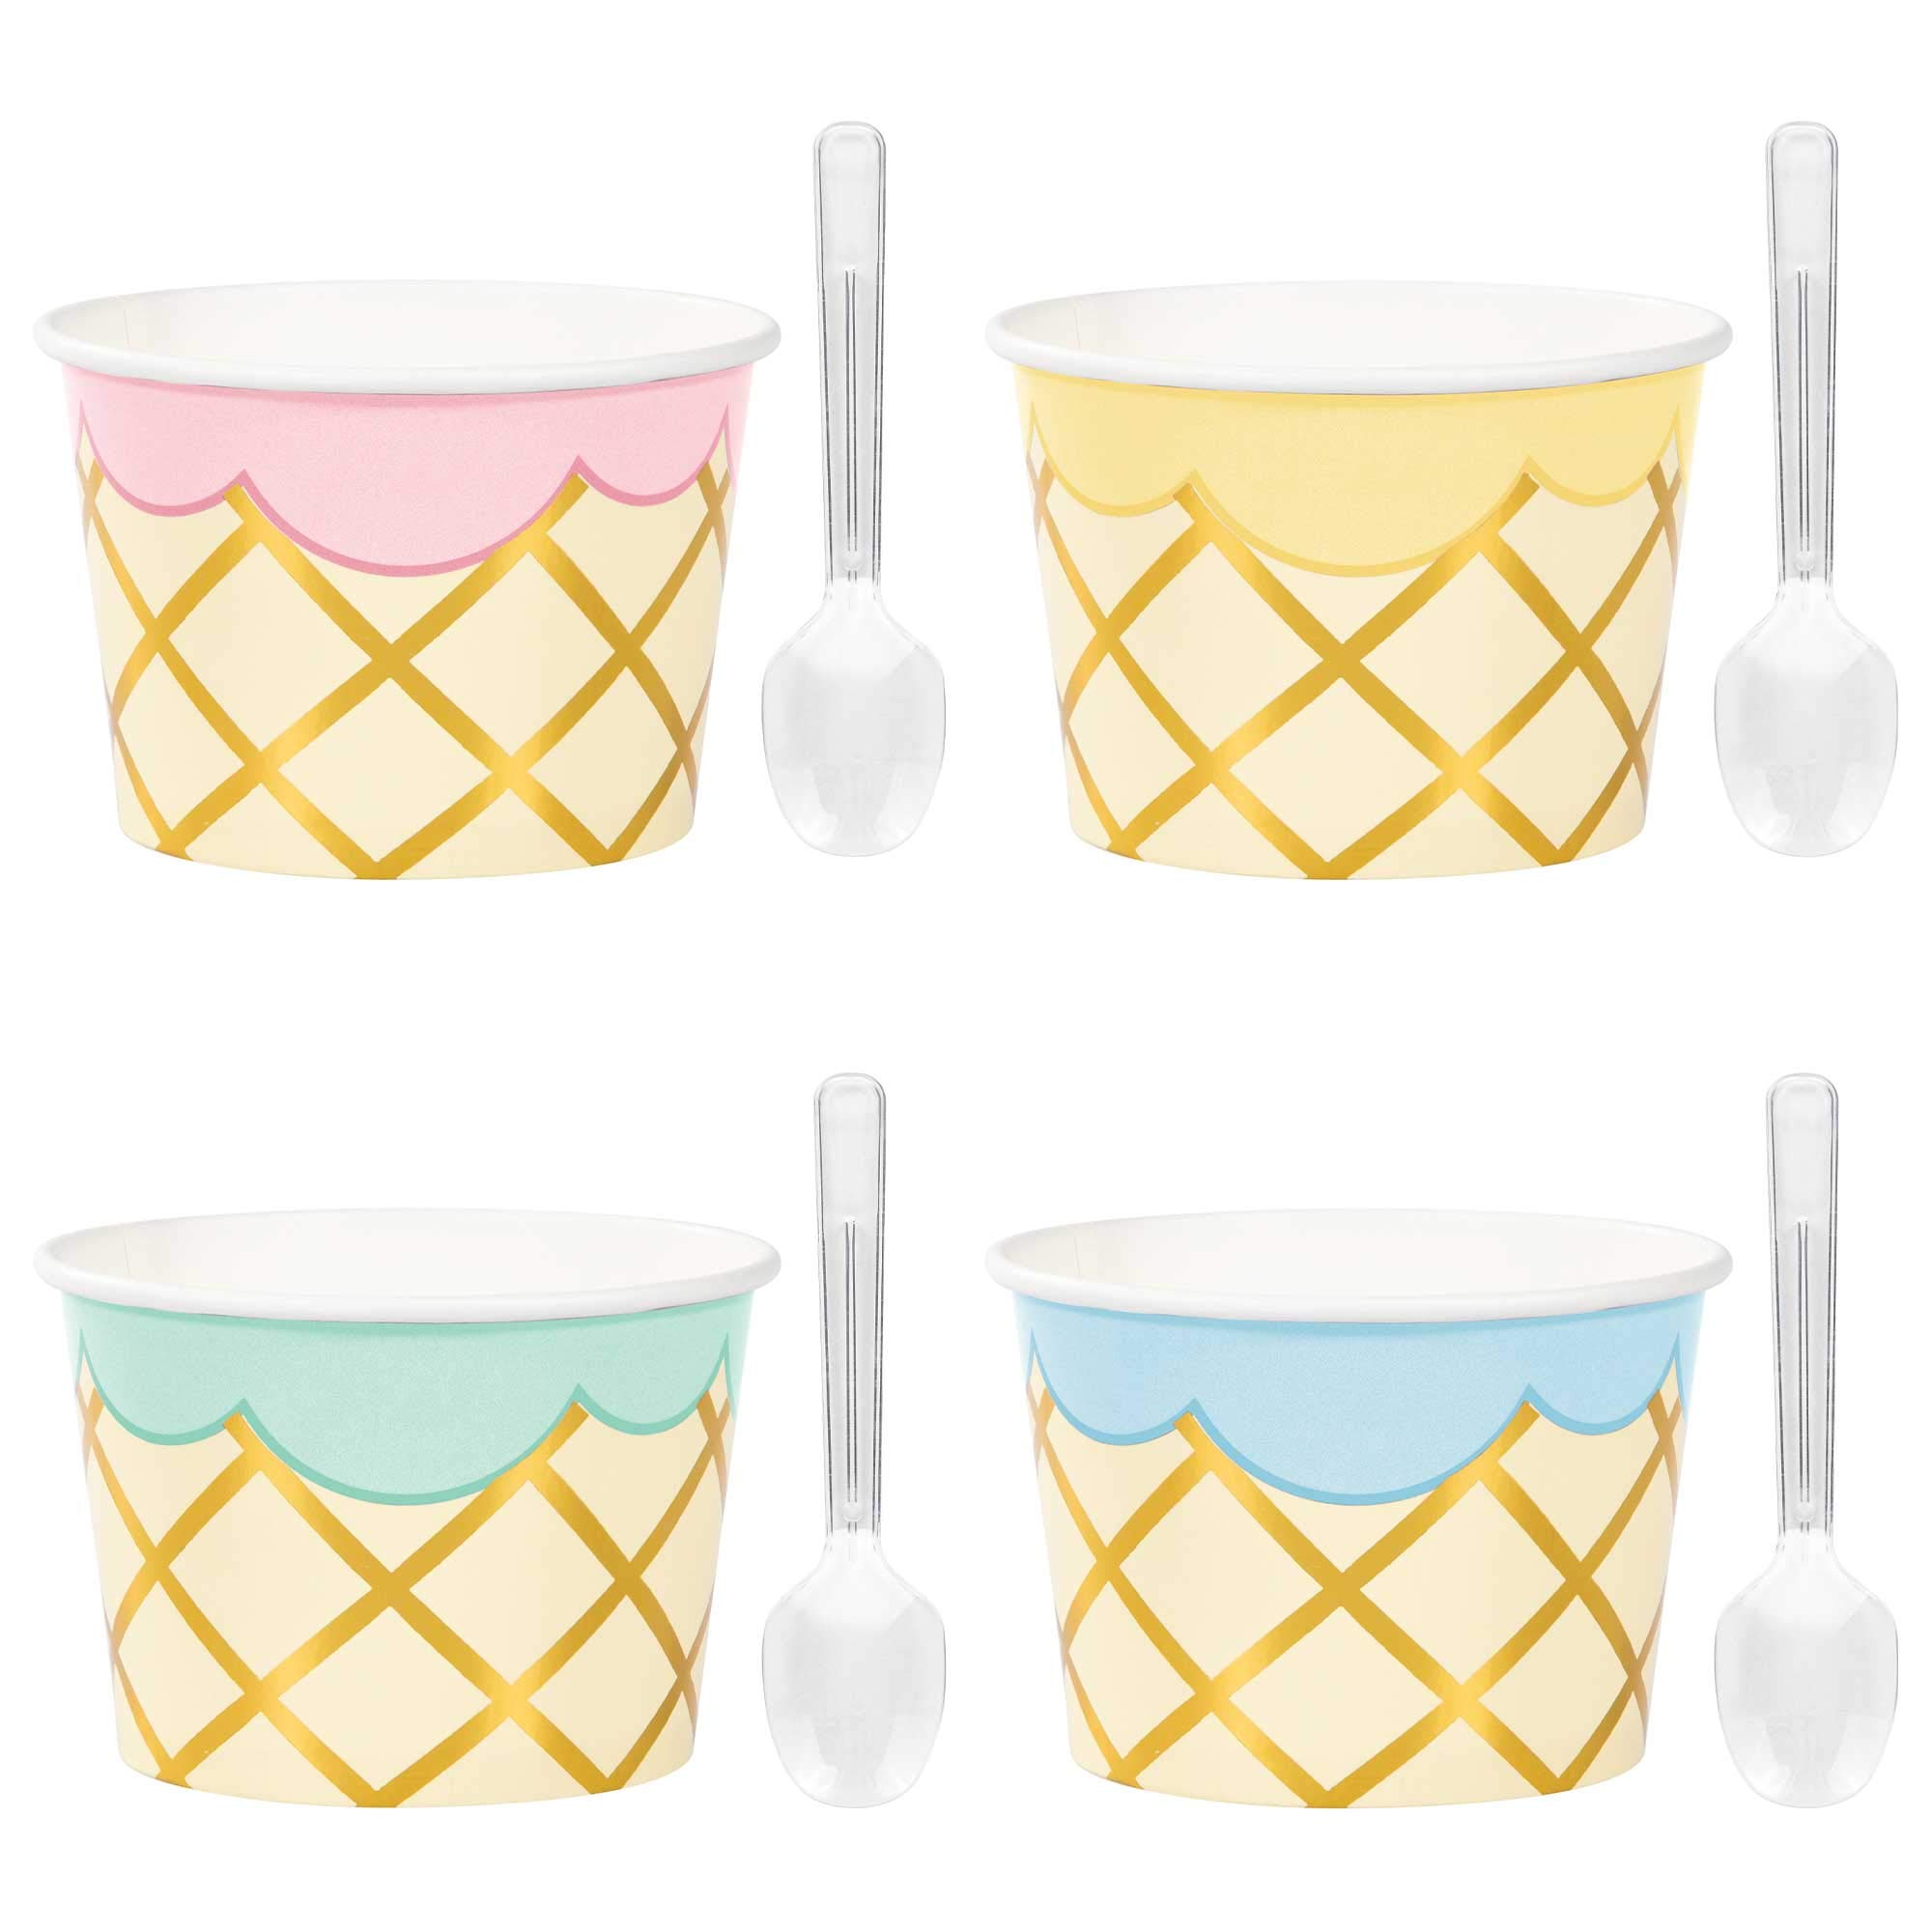 Creative Converting Ice cream Party Treat cups with Spoons, 8 ct